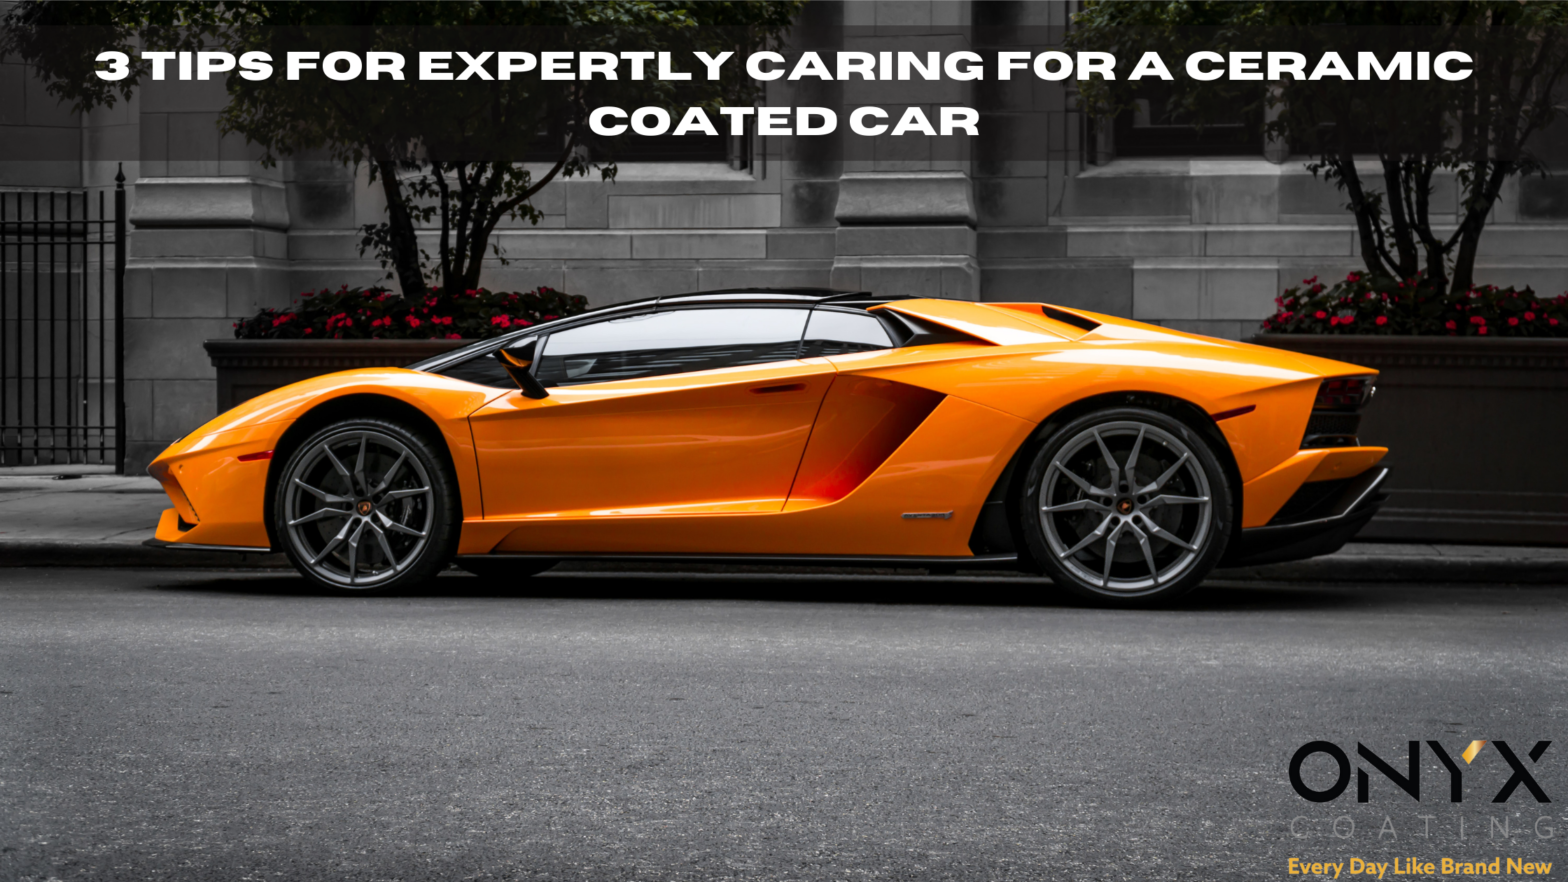 3 tips for expertly caring for a Ceramic Coated car